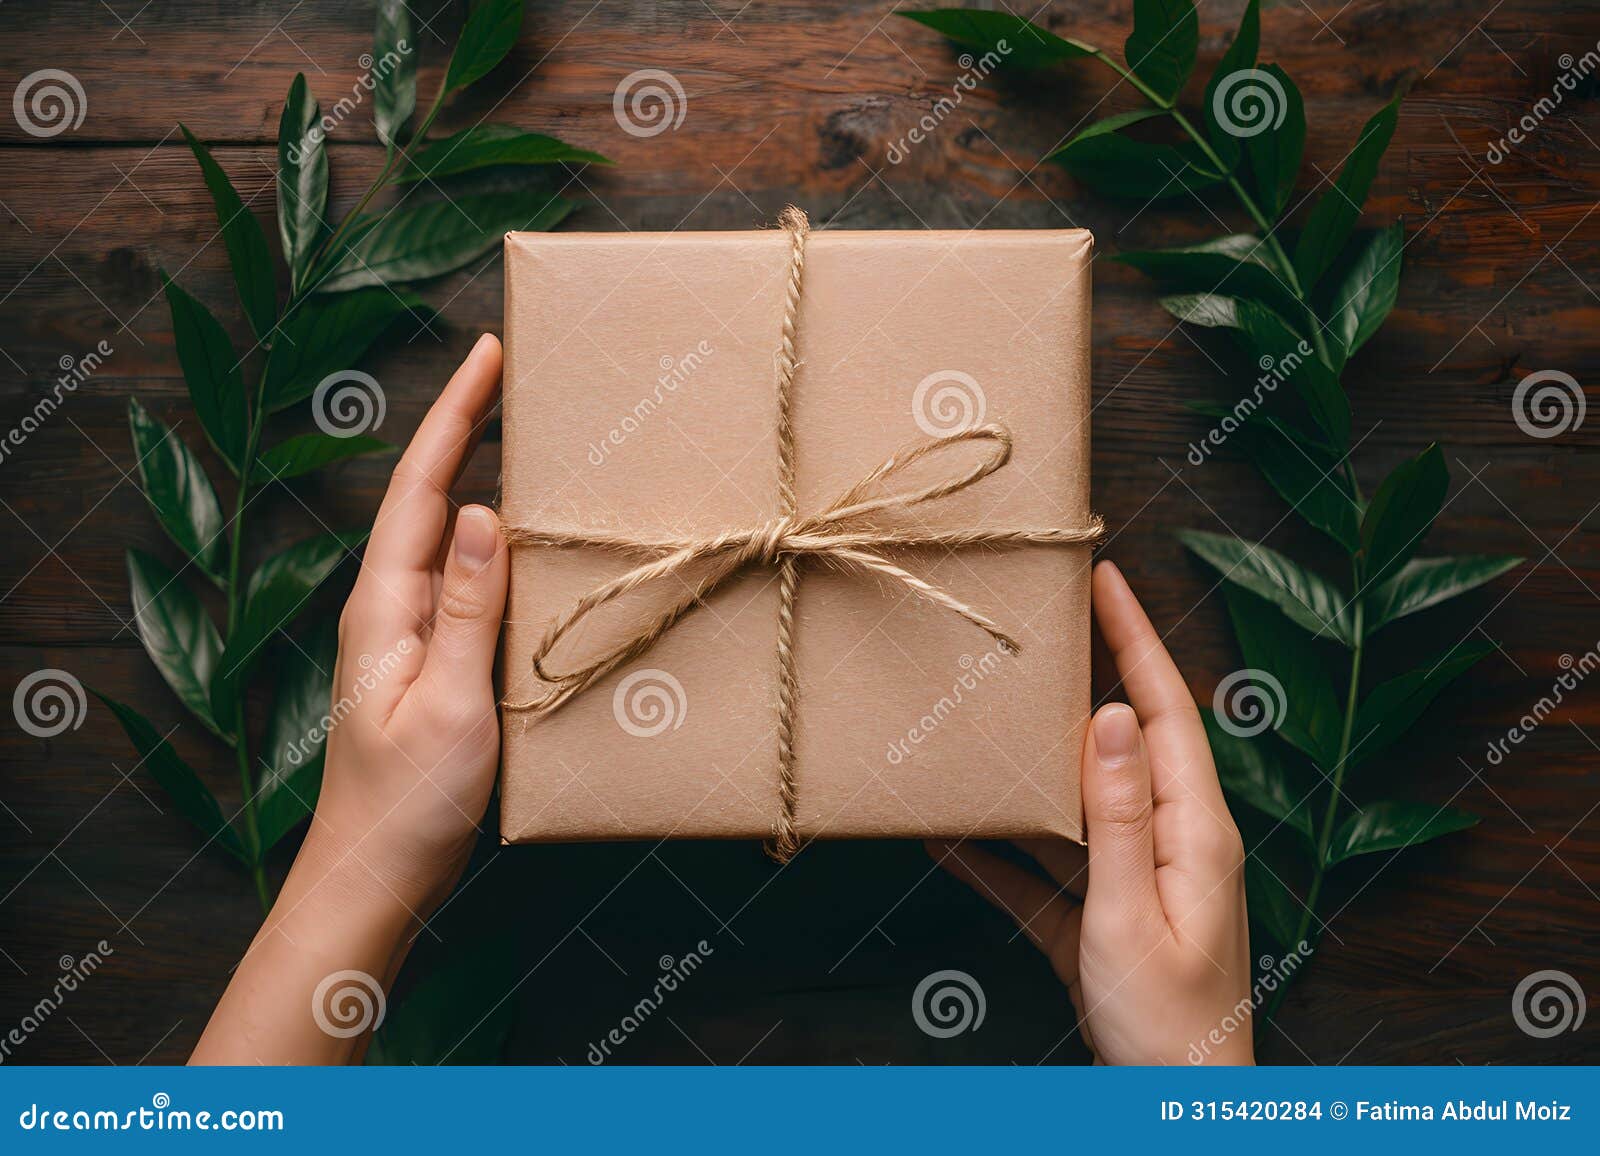 gift giving sentiment wrapped box izes love and celebration